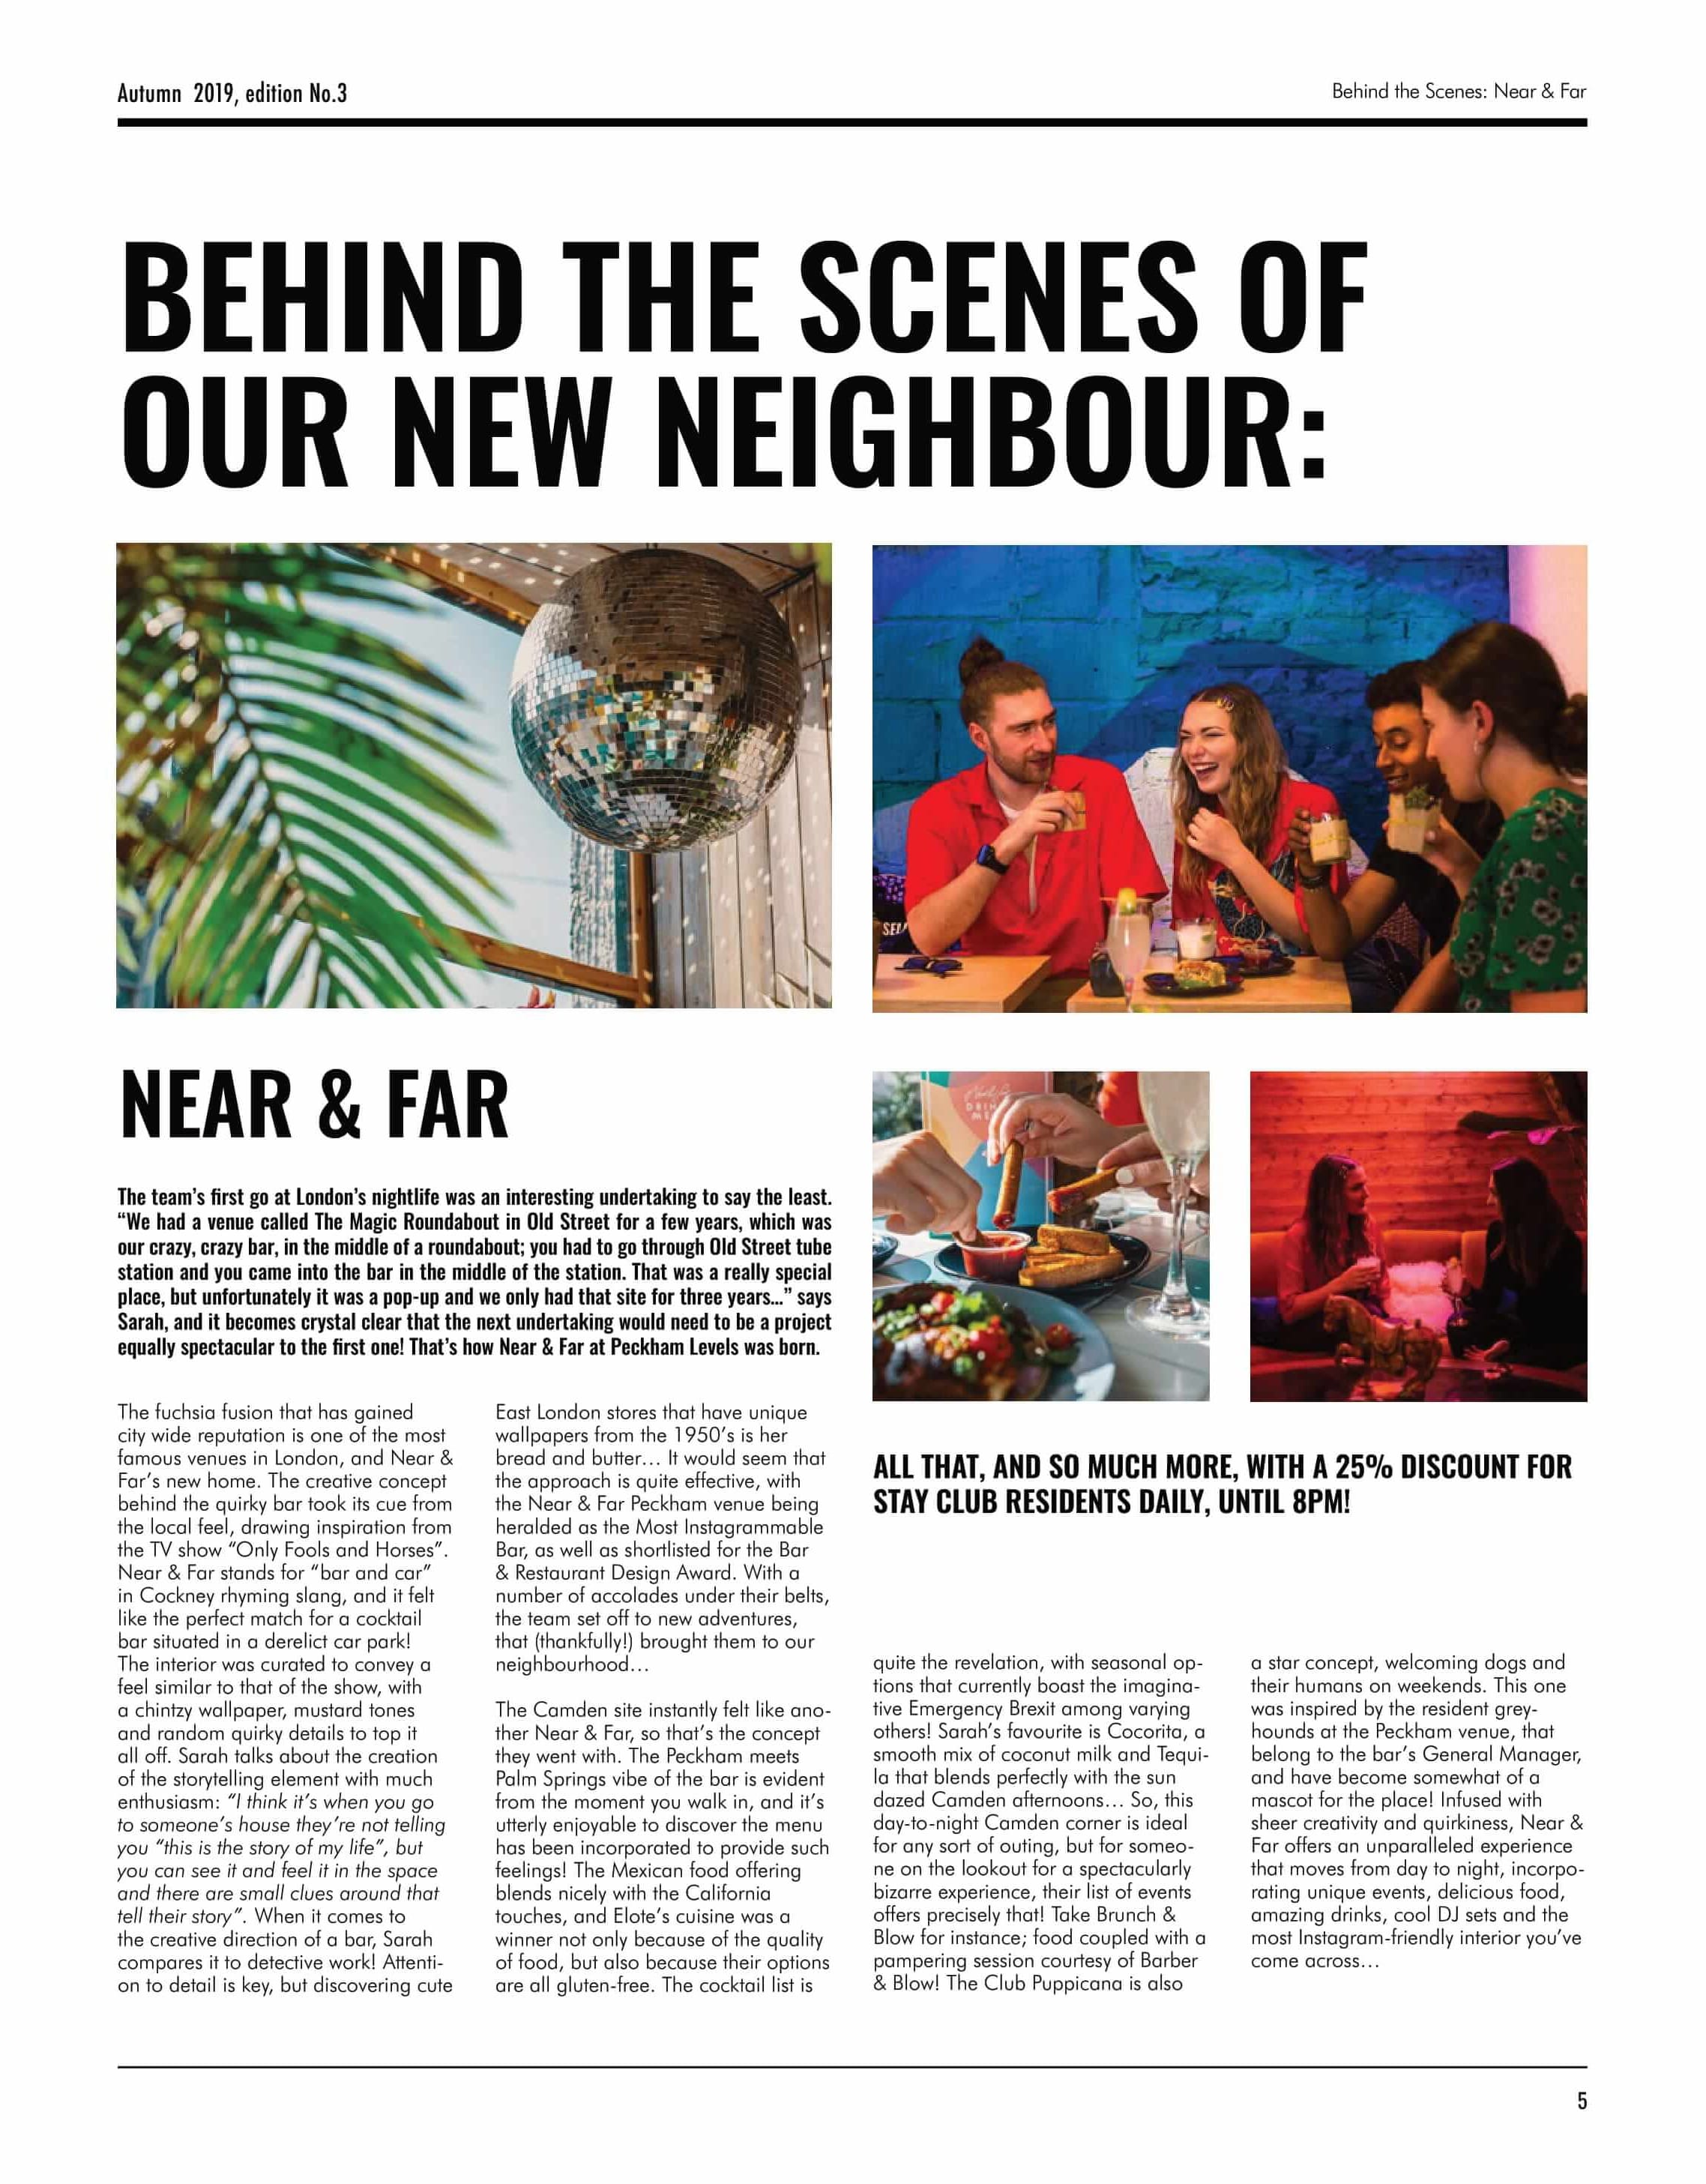 The Stay Club Newspaper Third Edition - Page 3.2